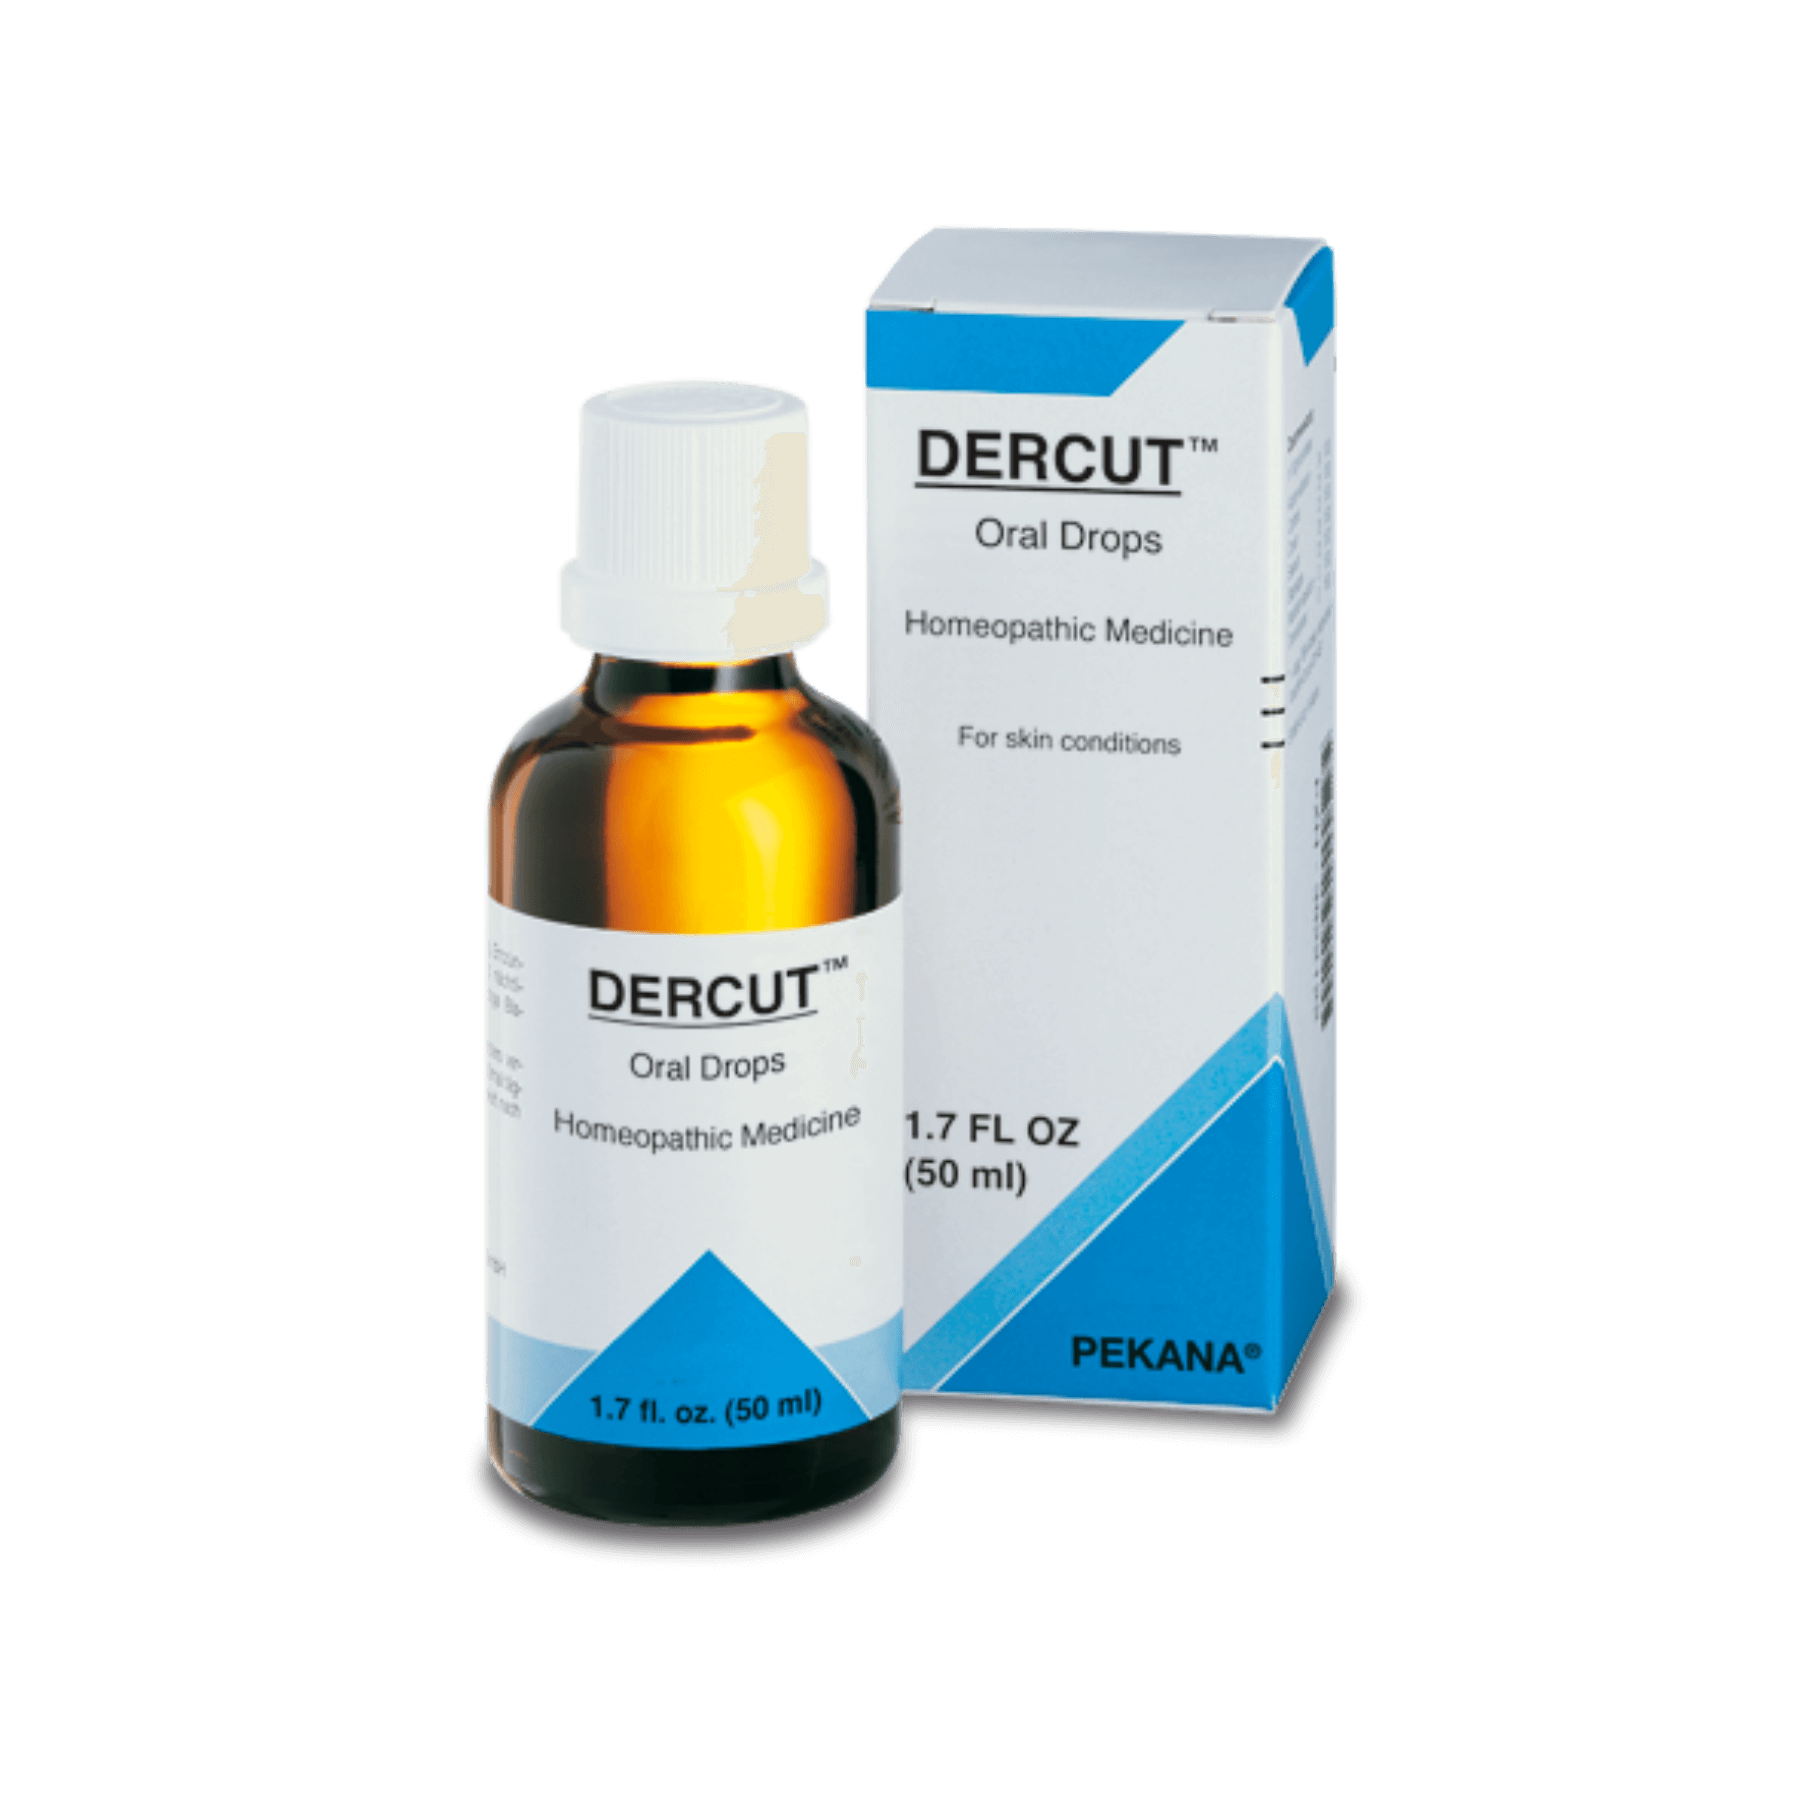 Image of Pekana Dercut Drops for homeopathic skin conditions